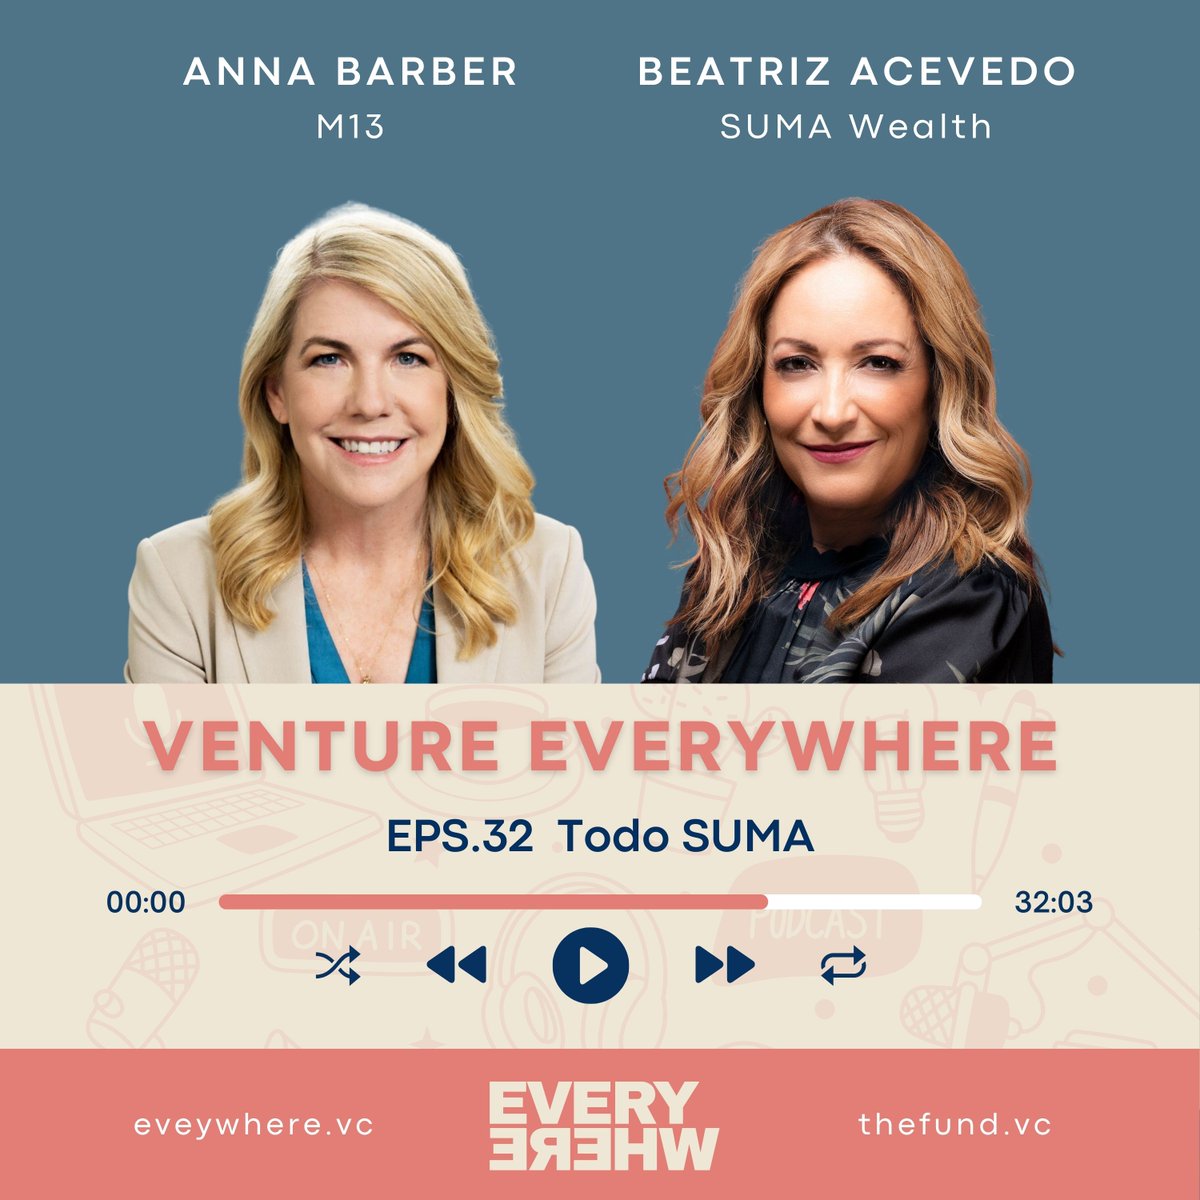 ON AIR: Venture Everywhere #Podcast EPS 32🎙️ @annawbarberbarber, Partner at @M13Company & LP in @EverywhereVC & @Bea_latina, co-founder of @wearesuma. 🎧Listen: 🍎 Apple: podcasts.apple.com/us/podcast/tod… 💚 Spotify: open.spotify.com/episode/0tWgWJ… 🗒️ Transcript at ideas.everywhere.vc/s/podcast